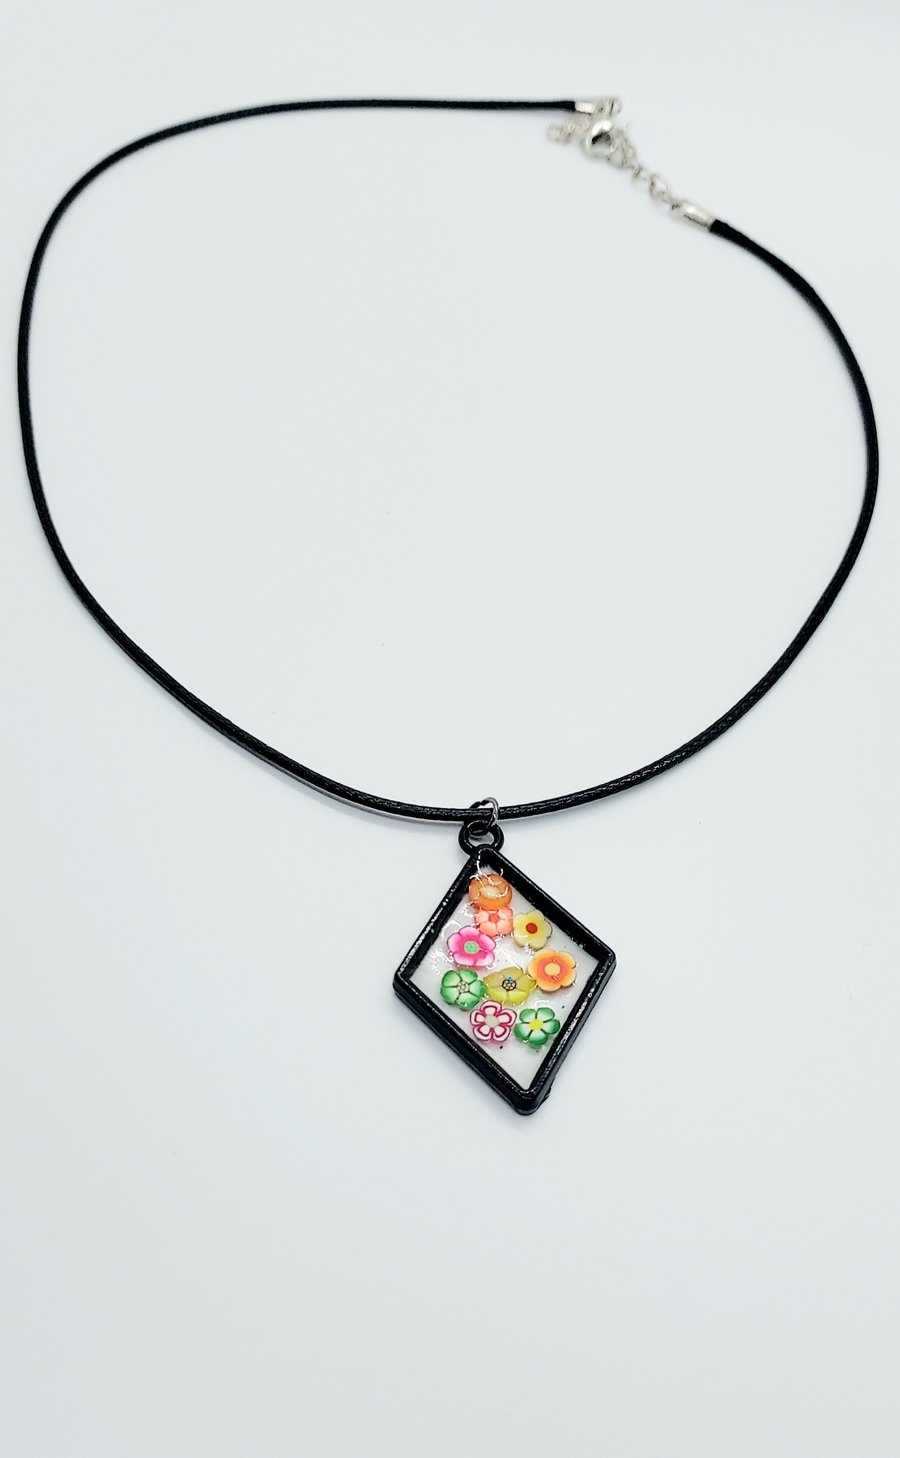 Resin pendant necklace with flower motif